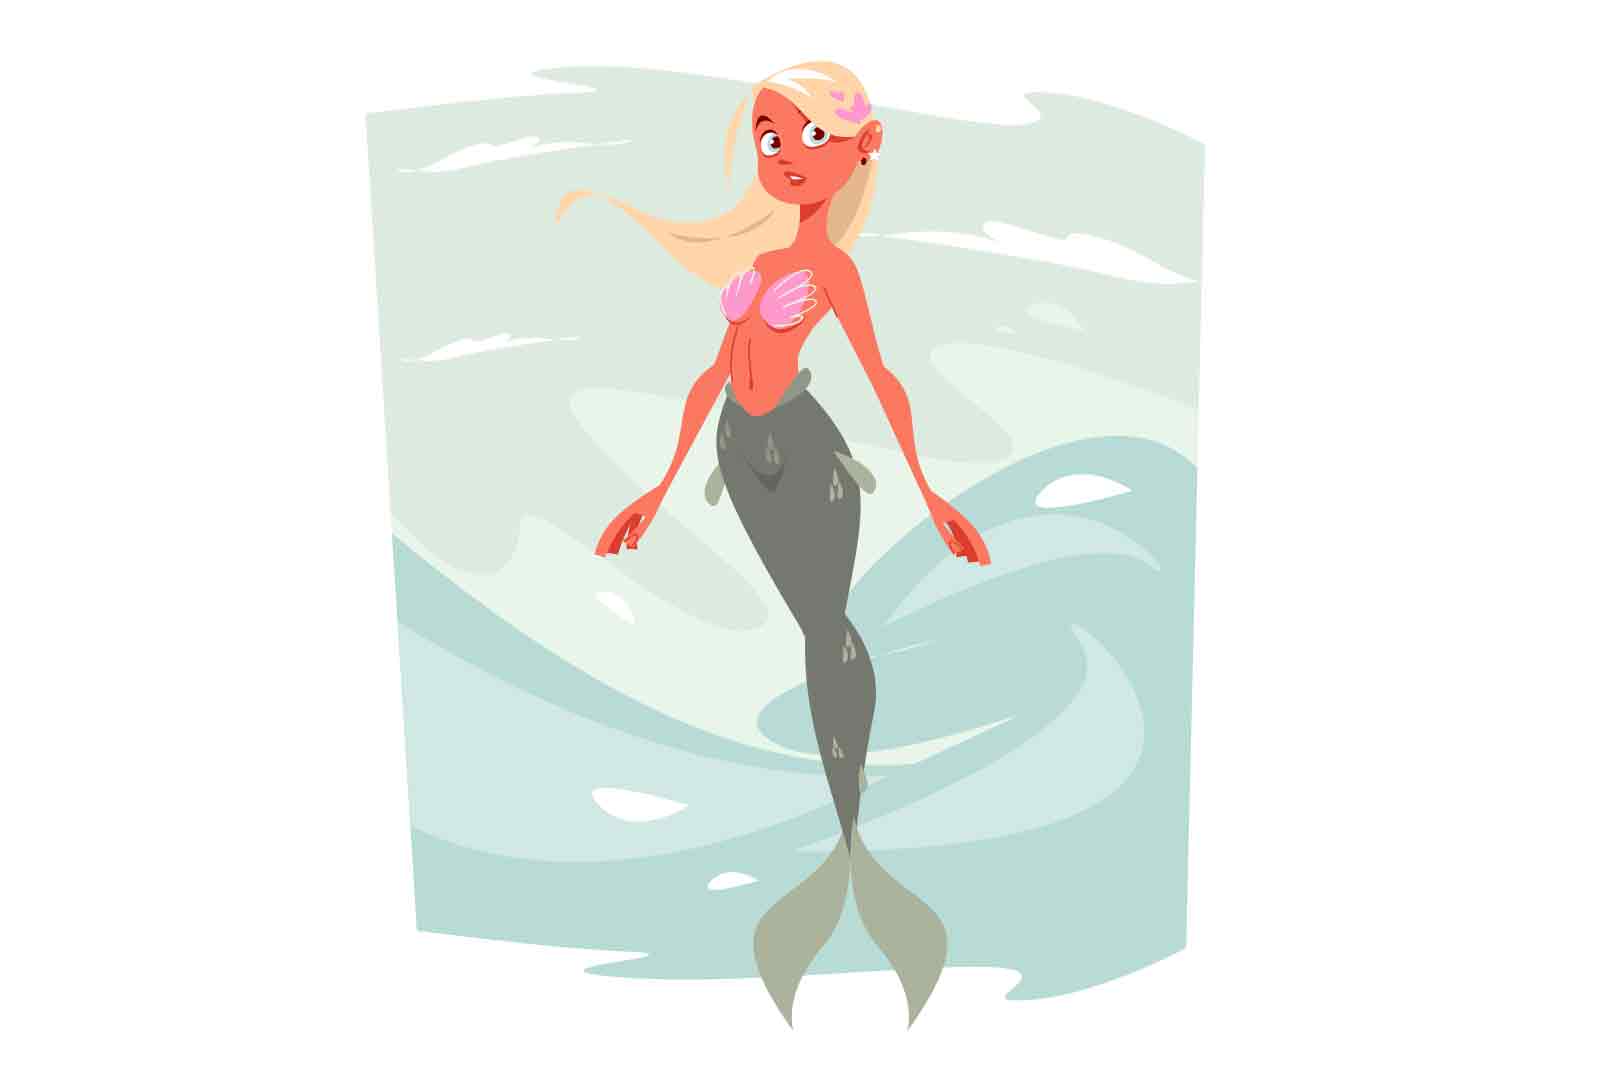 Cute cartoon mermaid with blonde hair and green tail vector illustration. Fictitious or mythical half-human sea creature flat concept